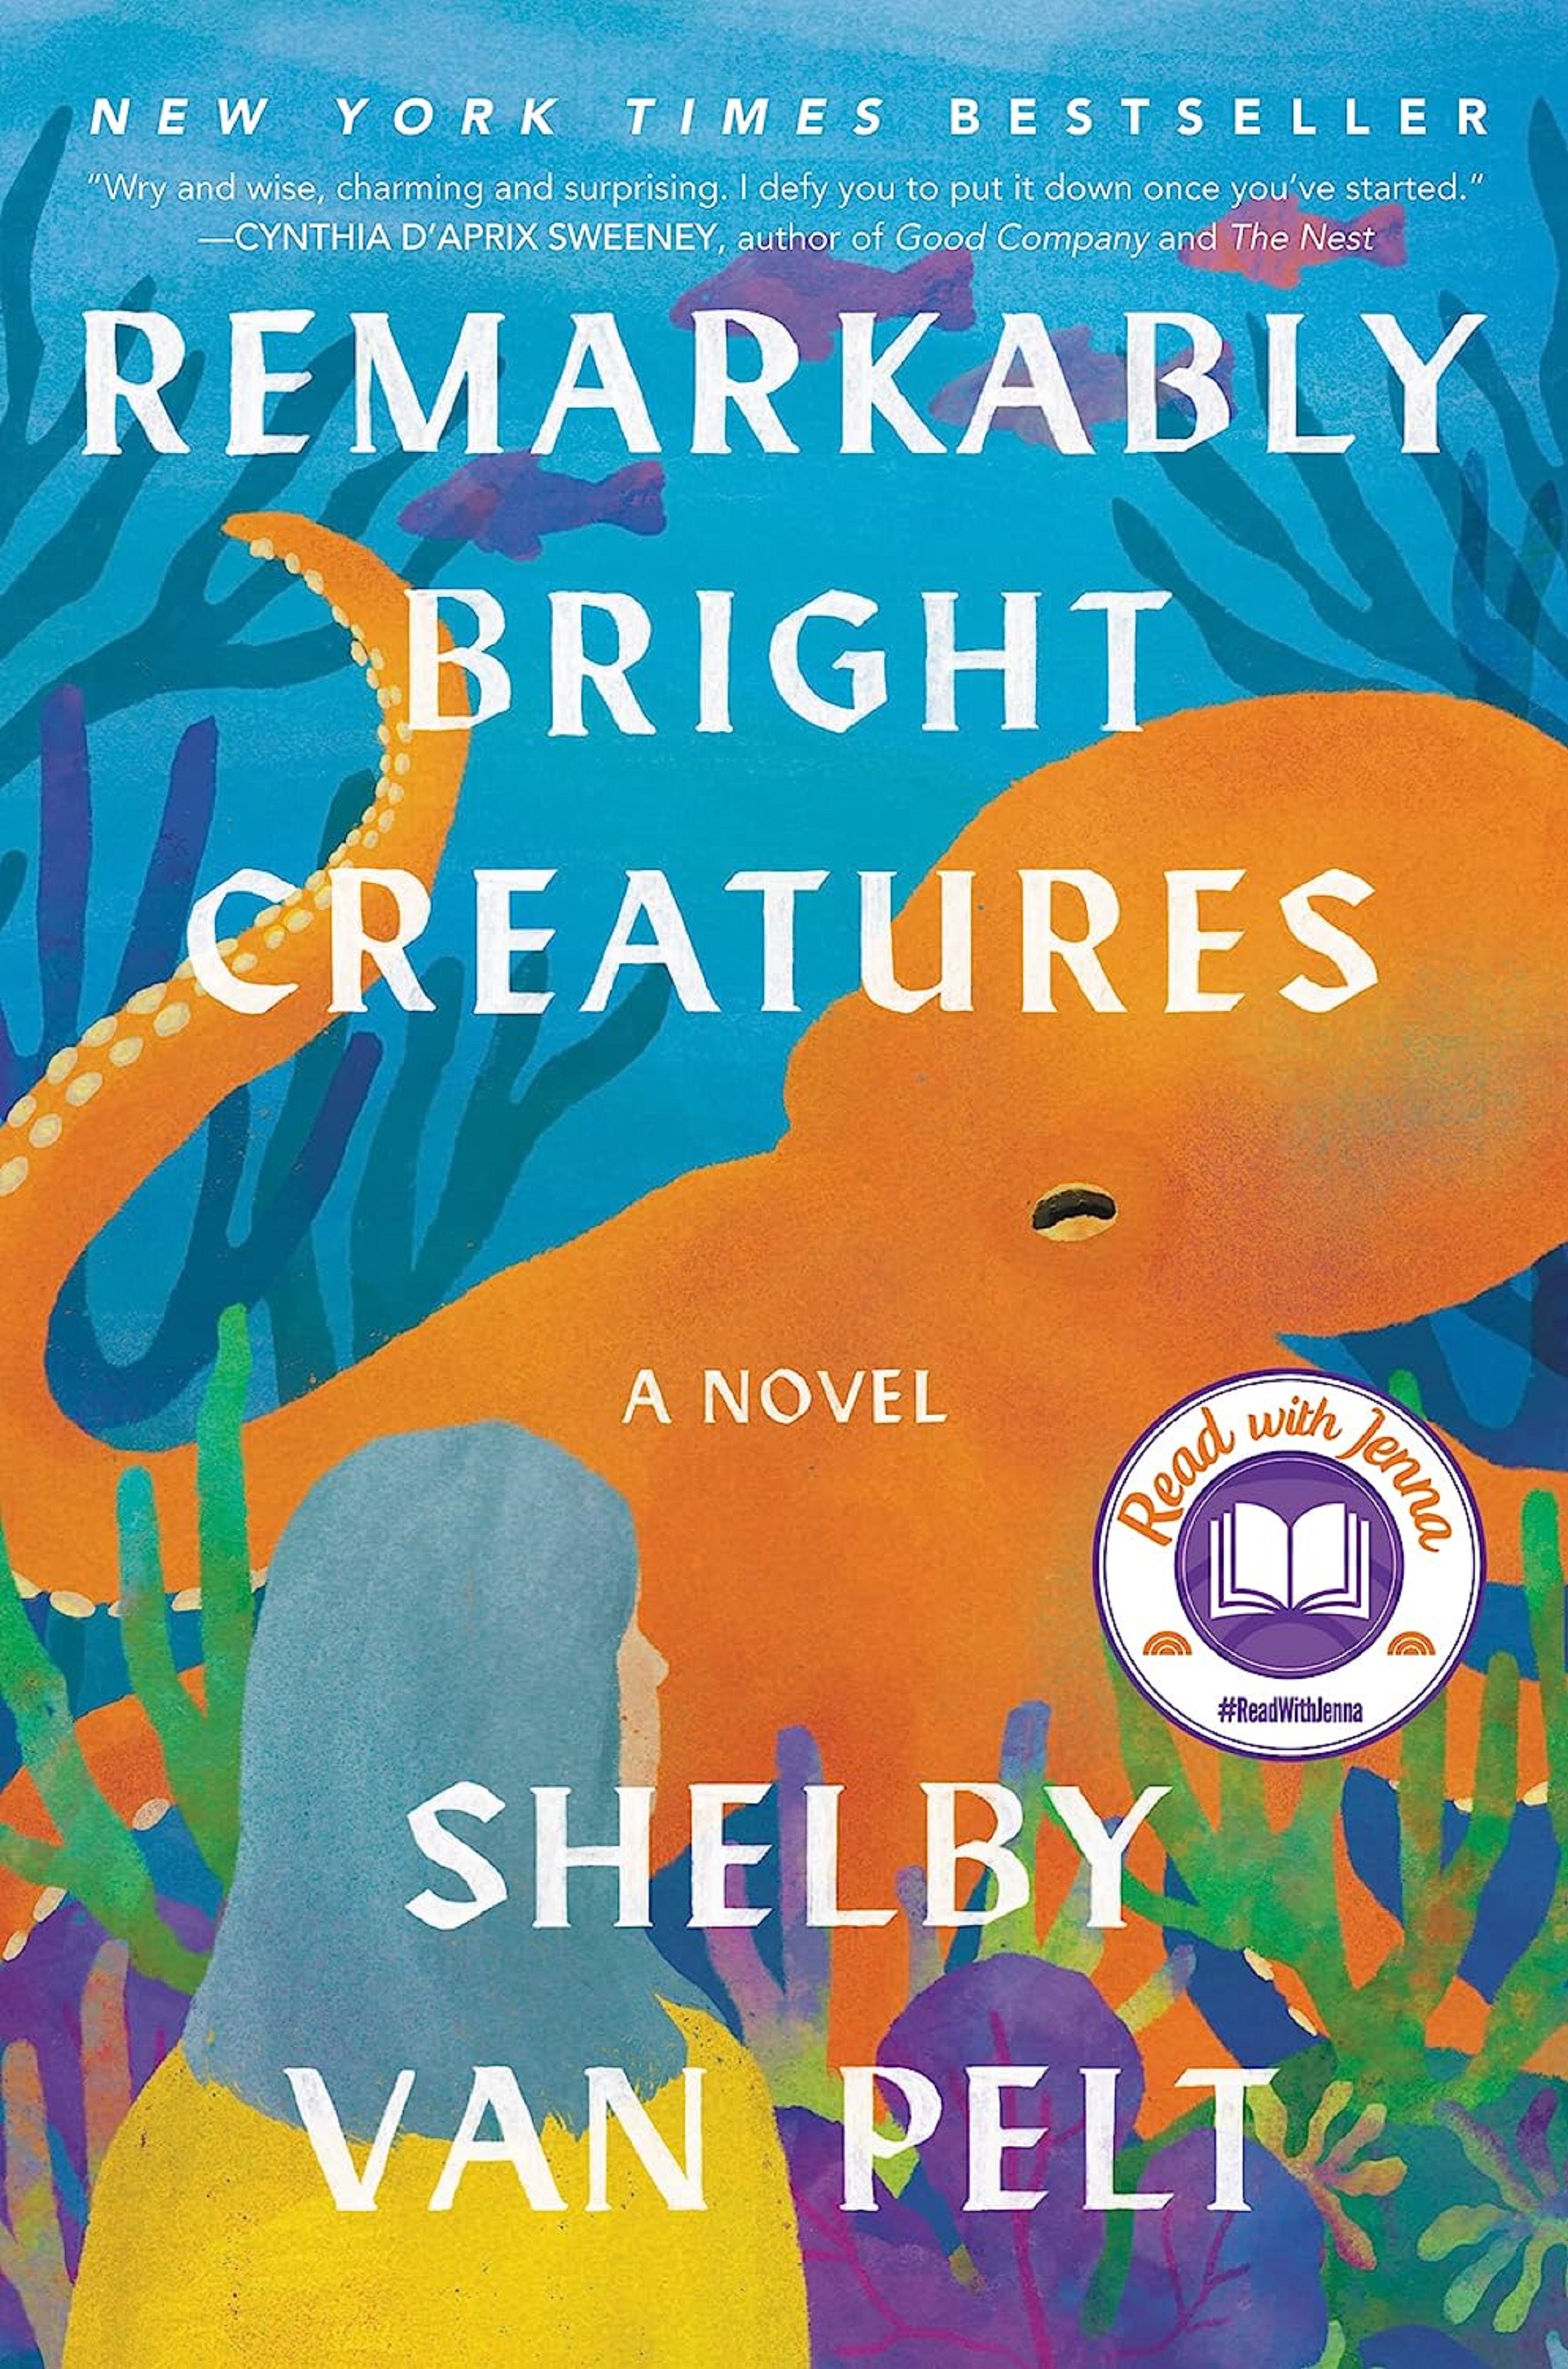 The Whimsical World of 'Remarkably Bright Creatures'